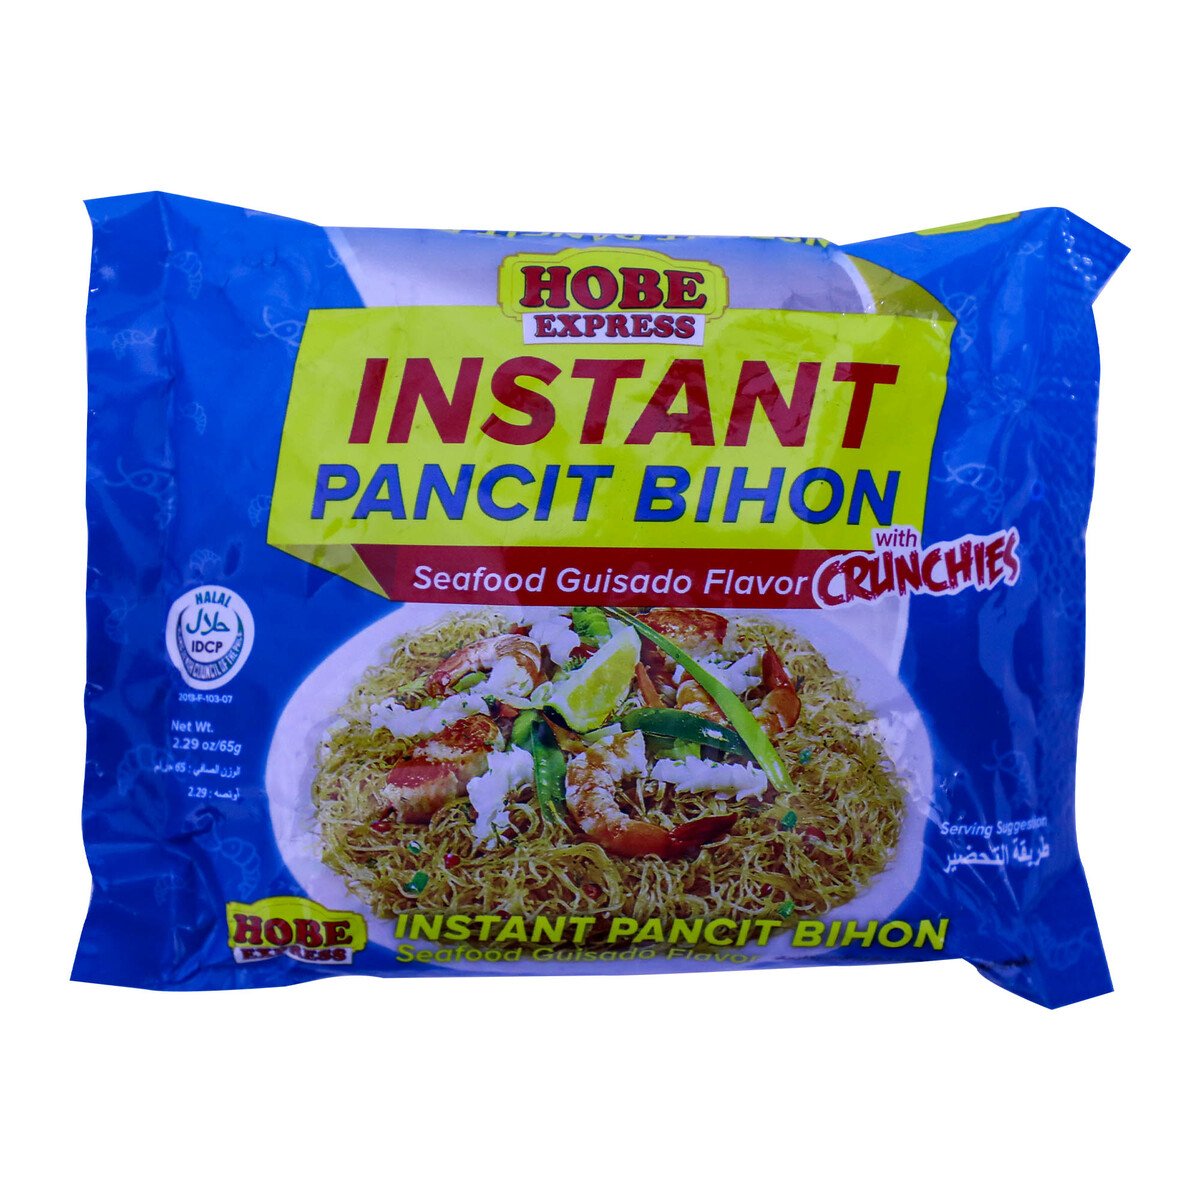 Hobe Express Instant Pancit Bihon Seafood Guisado Flavor with Crunchies 65 g